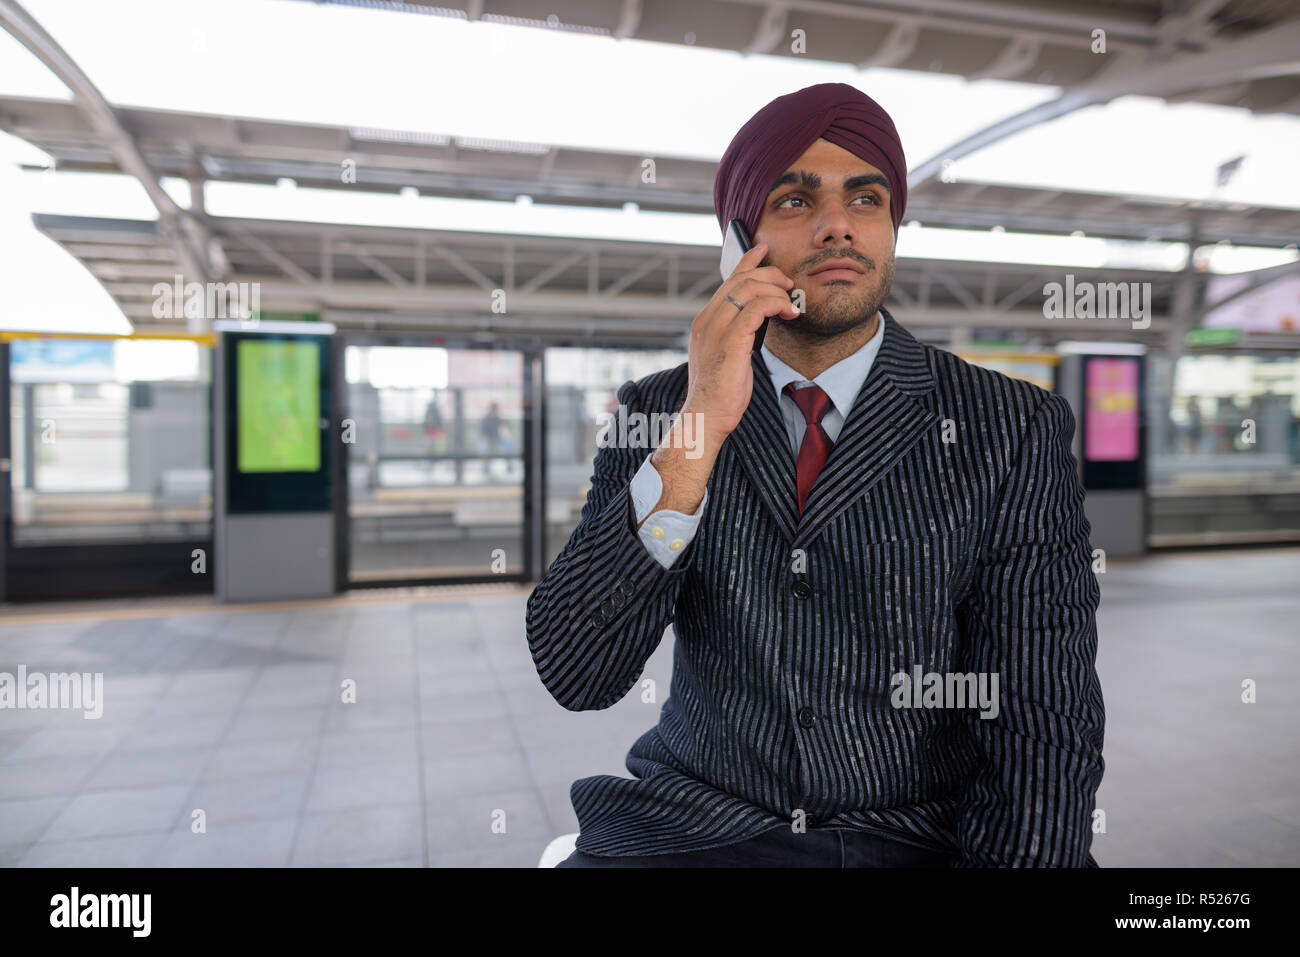 Indian businessman talking on phone at train station Stock Photo